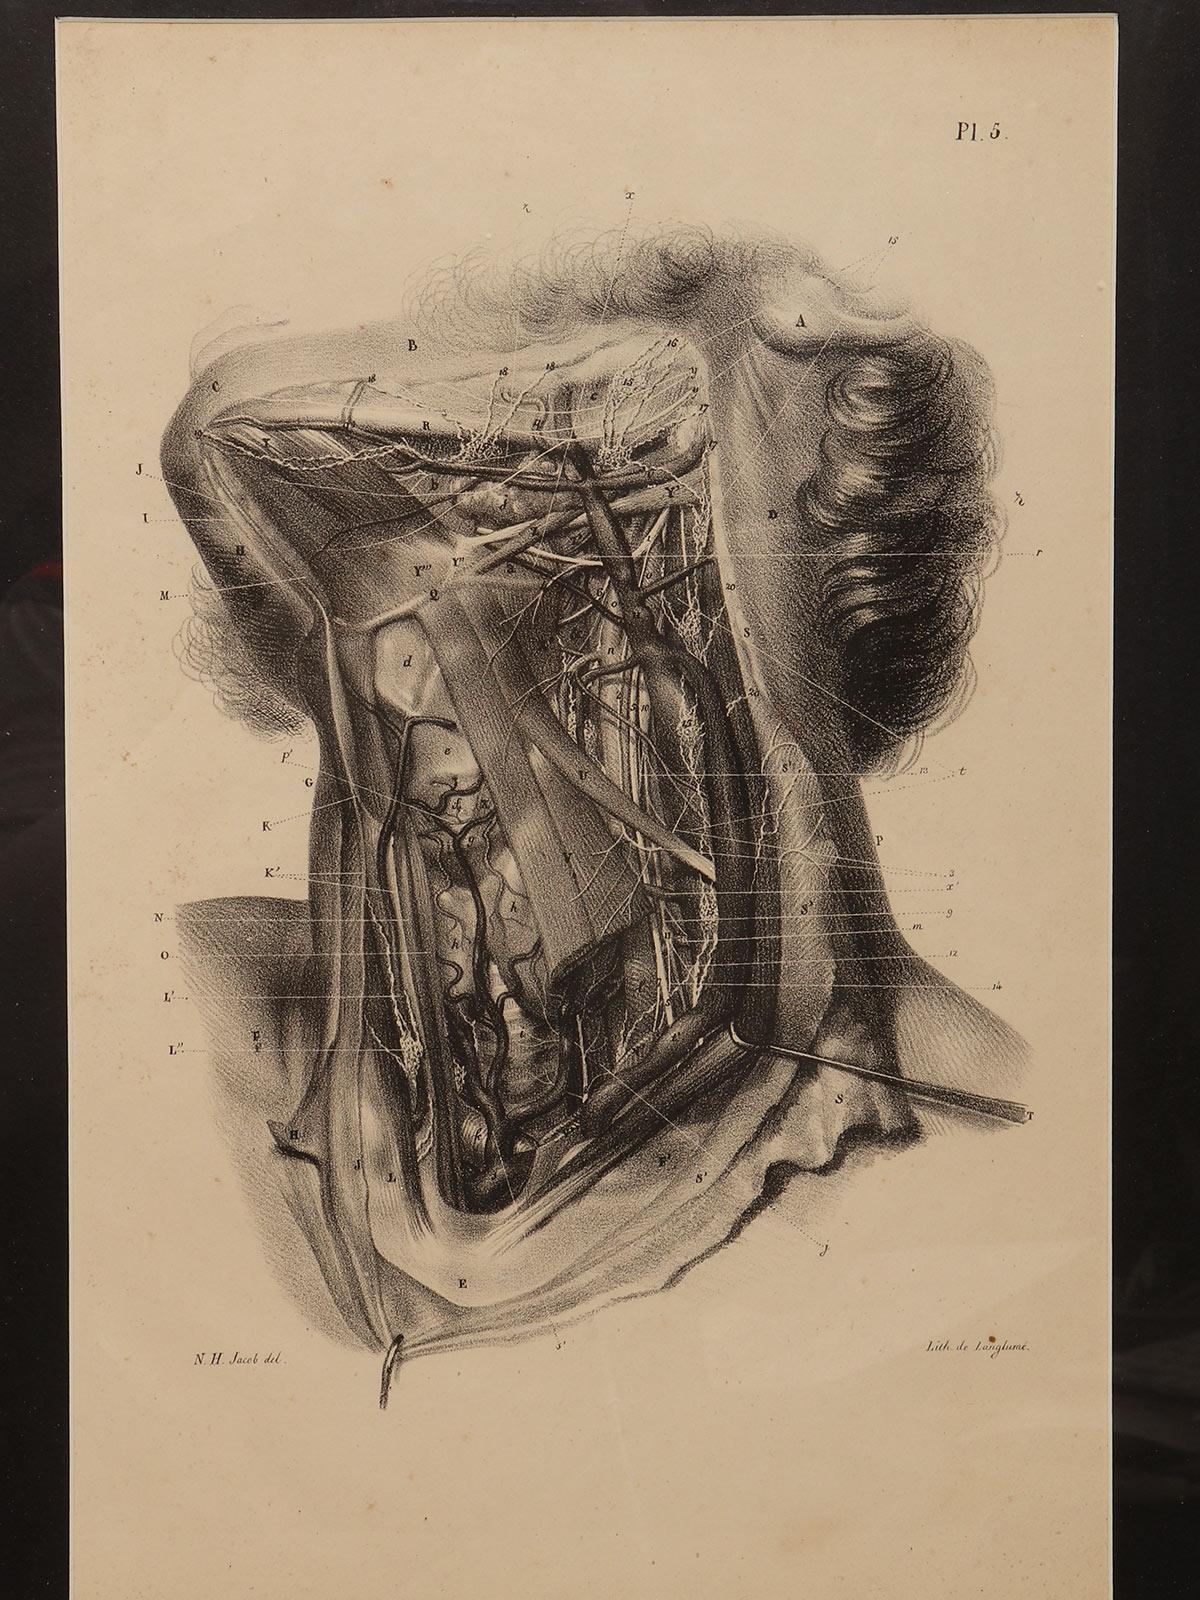 An anatomical lithographic print on paper, depicting a cross section of the muscular system of the neck. Black lacquered fir wood frame with golden ramin wood batting. N. H. Jacob, Paris mid-19th century